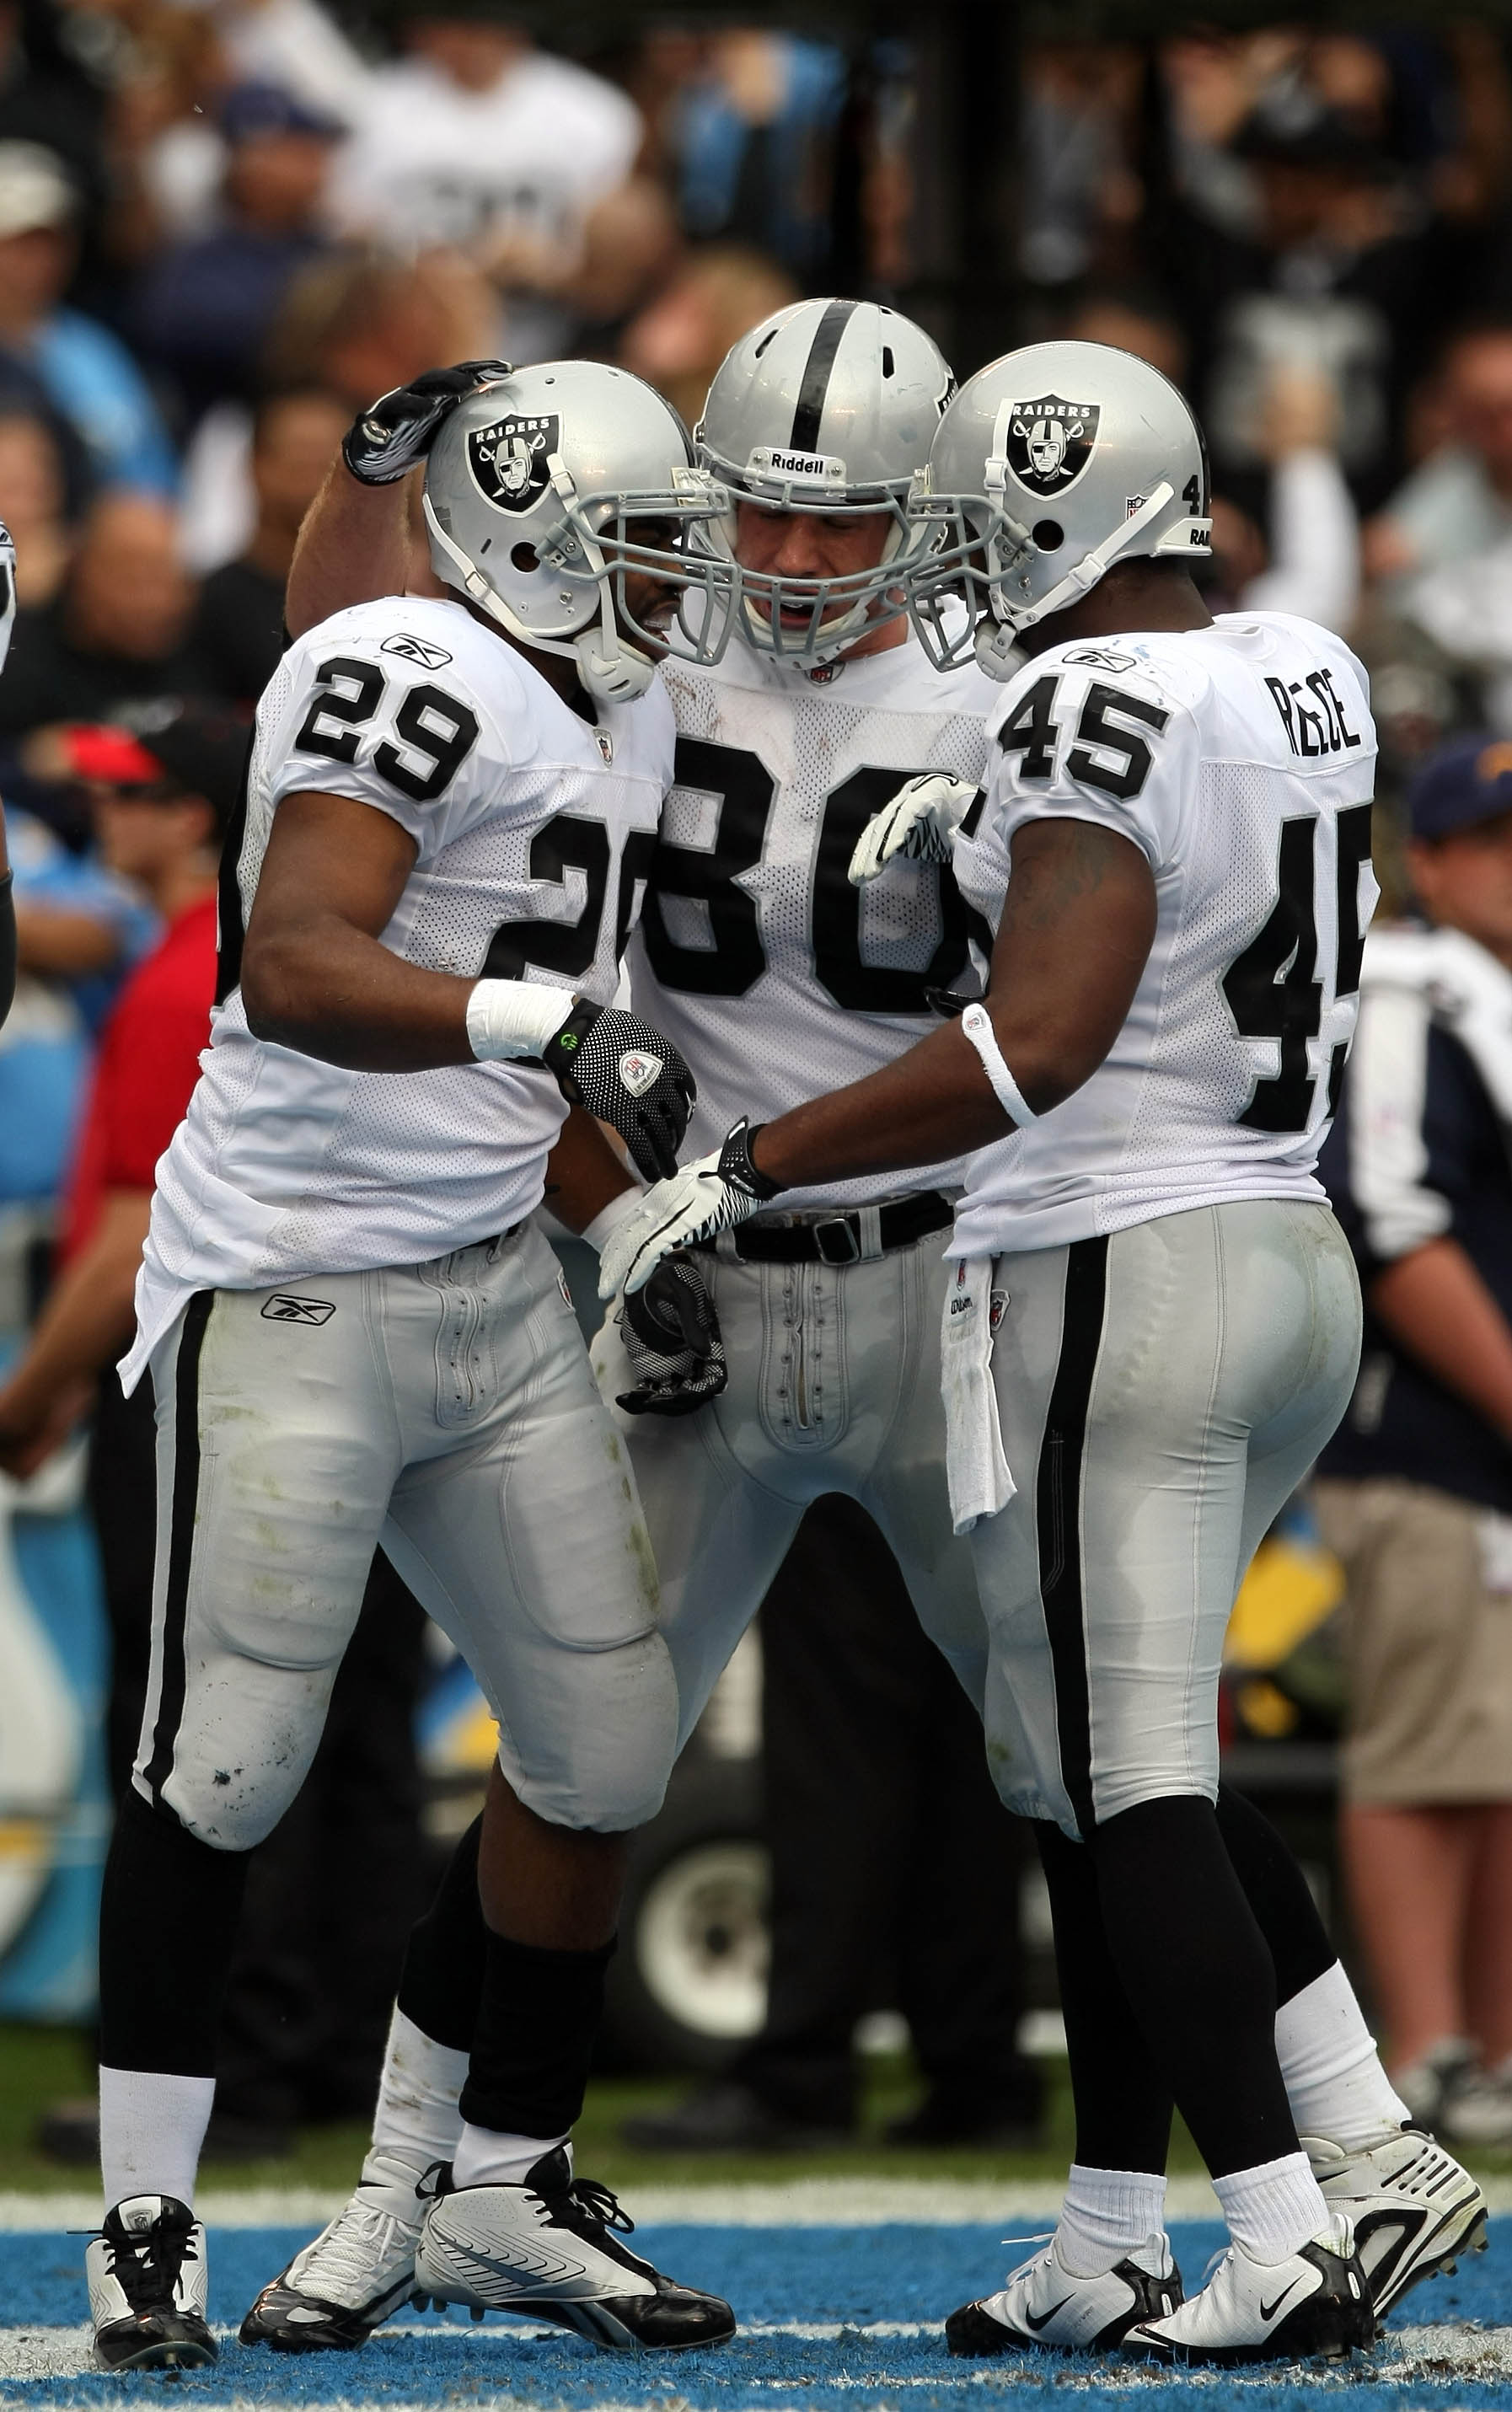 SAN DIEGO, CA - DECEMBER 5: Runningback Michael Bush #29 of the Oakland Raiders is congratulated by teammates Zach Miller #80 and Marcel Reece #45 after scoring a touchdown during their NFL game at Qualcomm Stadium on December 5, 2010 in San Diego, Califo